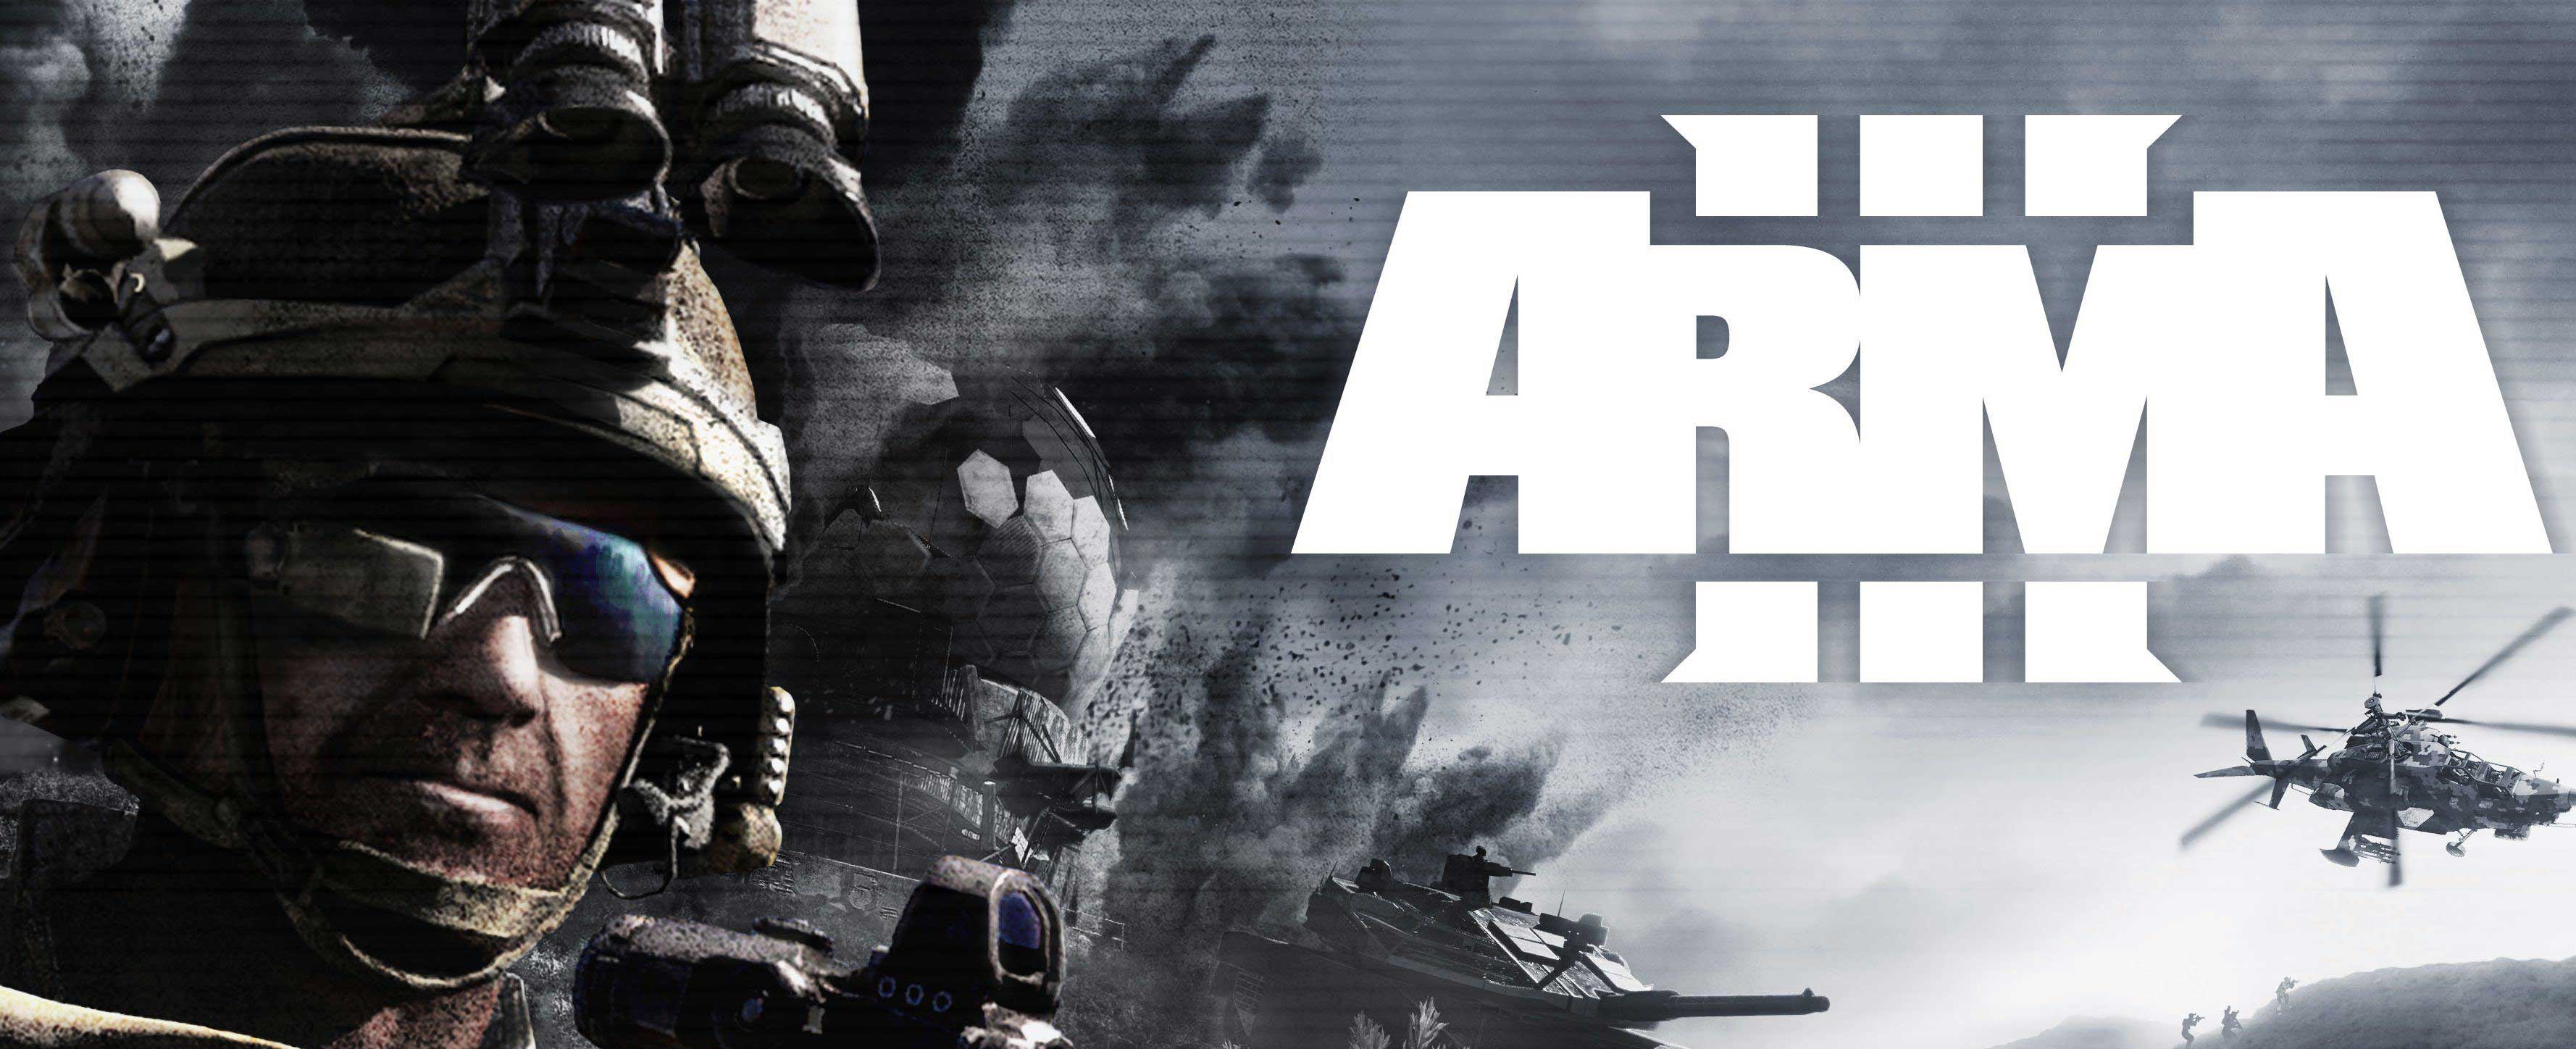 how to update arma 3 server